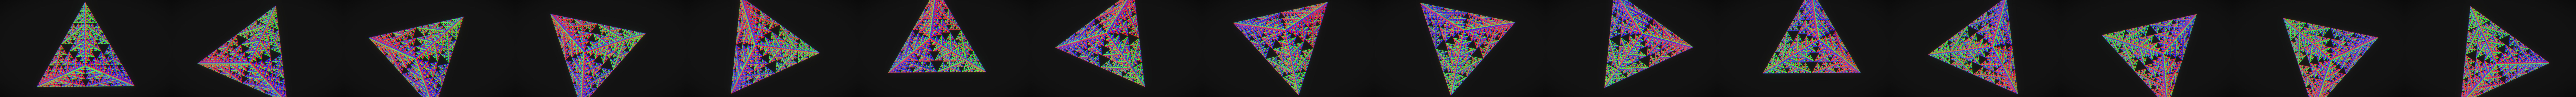 The Octahedroflake: A higher-dimensional analog of the Sierpinski Triangle  by Nat, Download free STL model